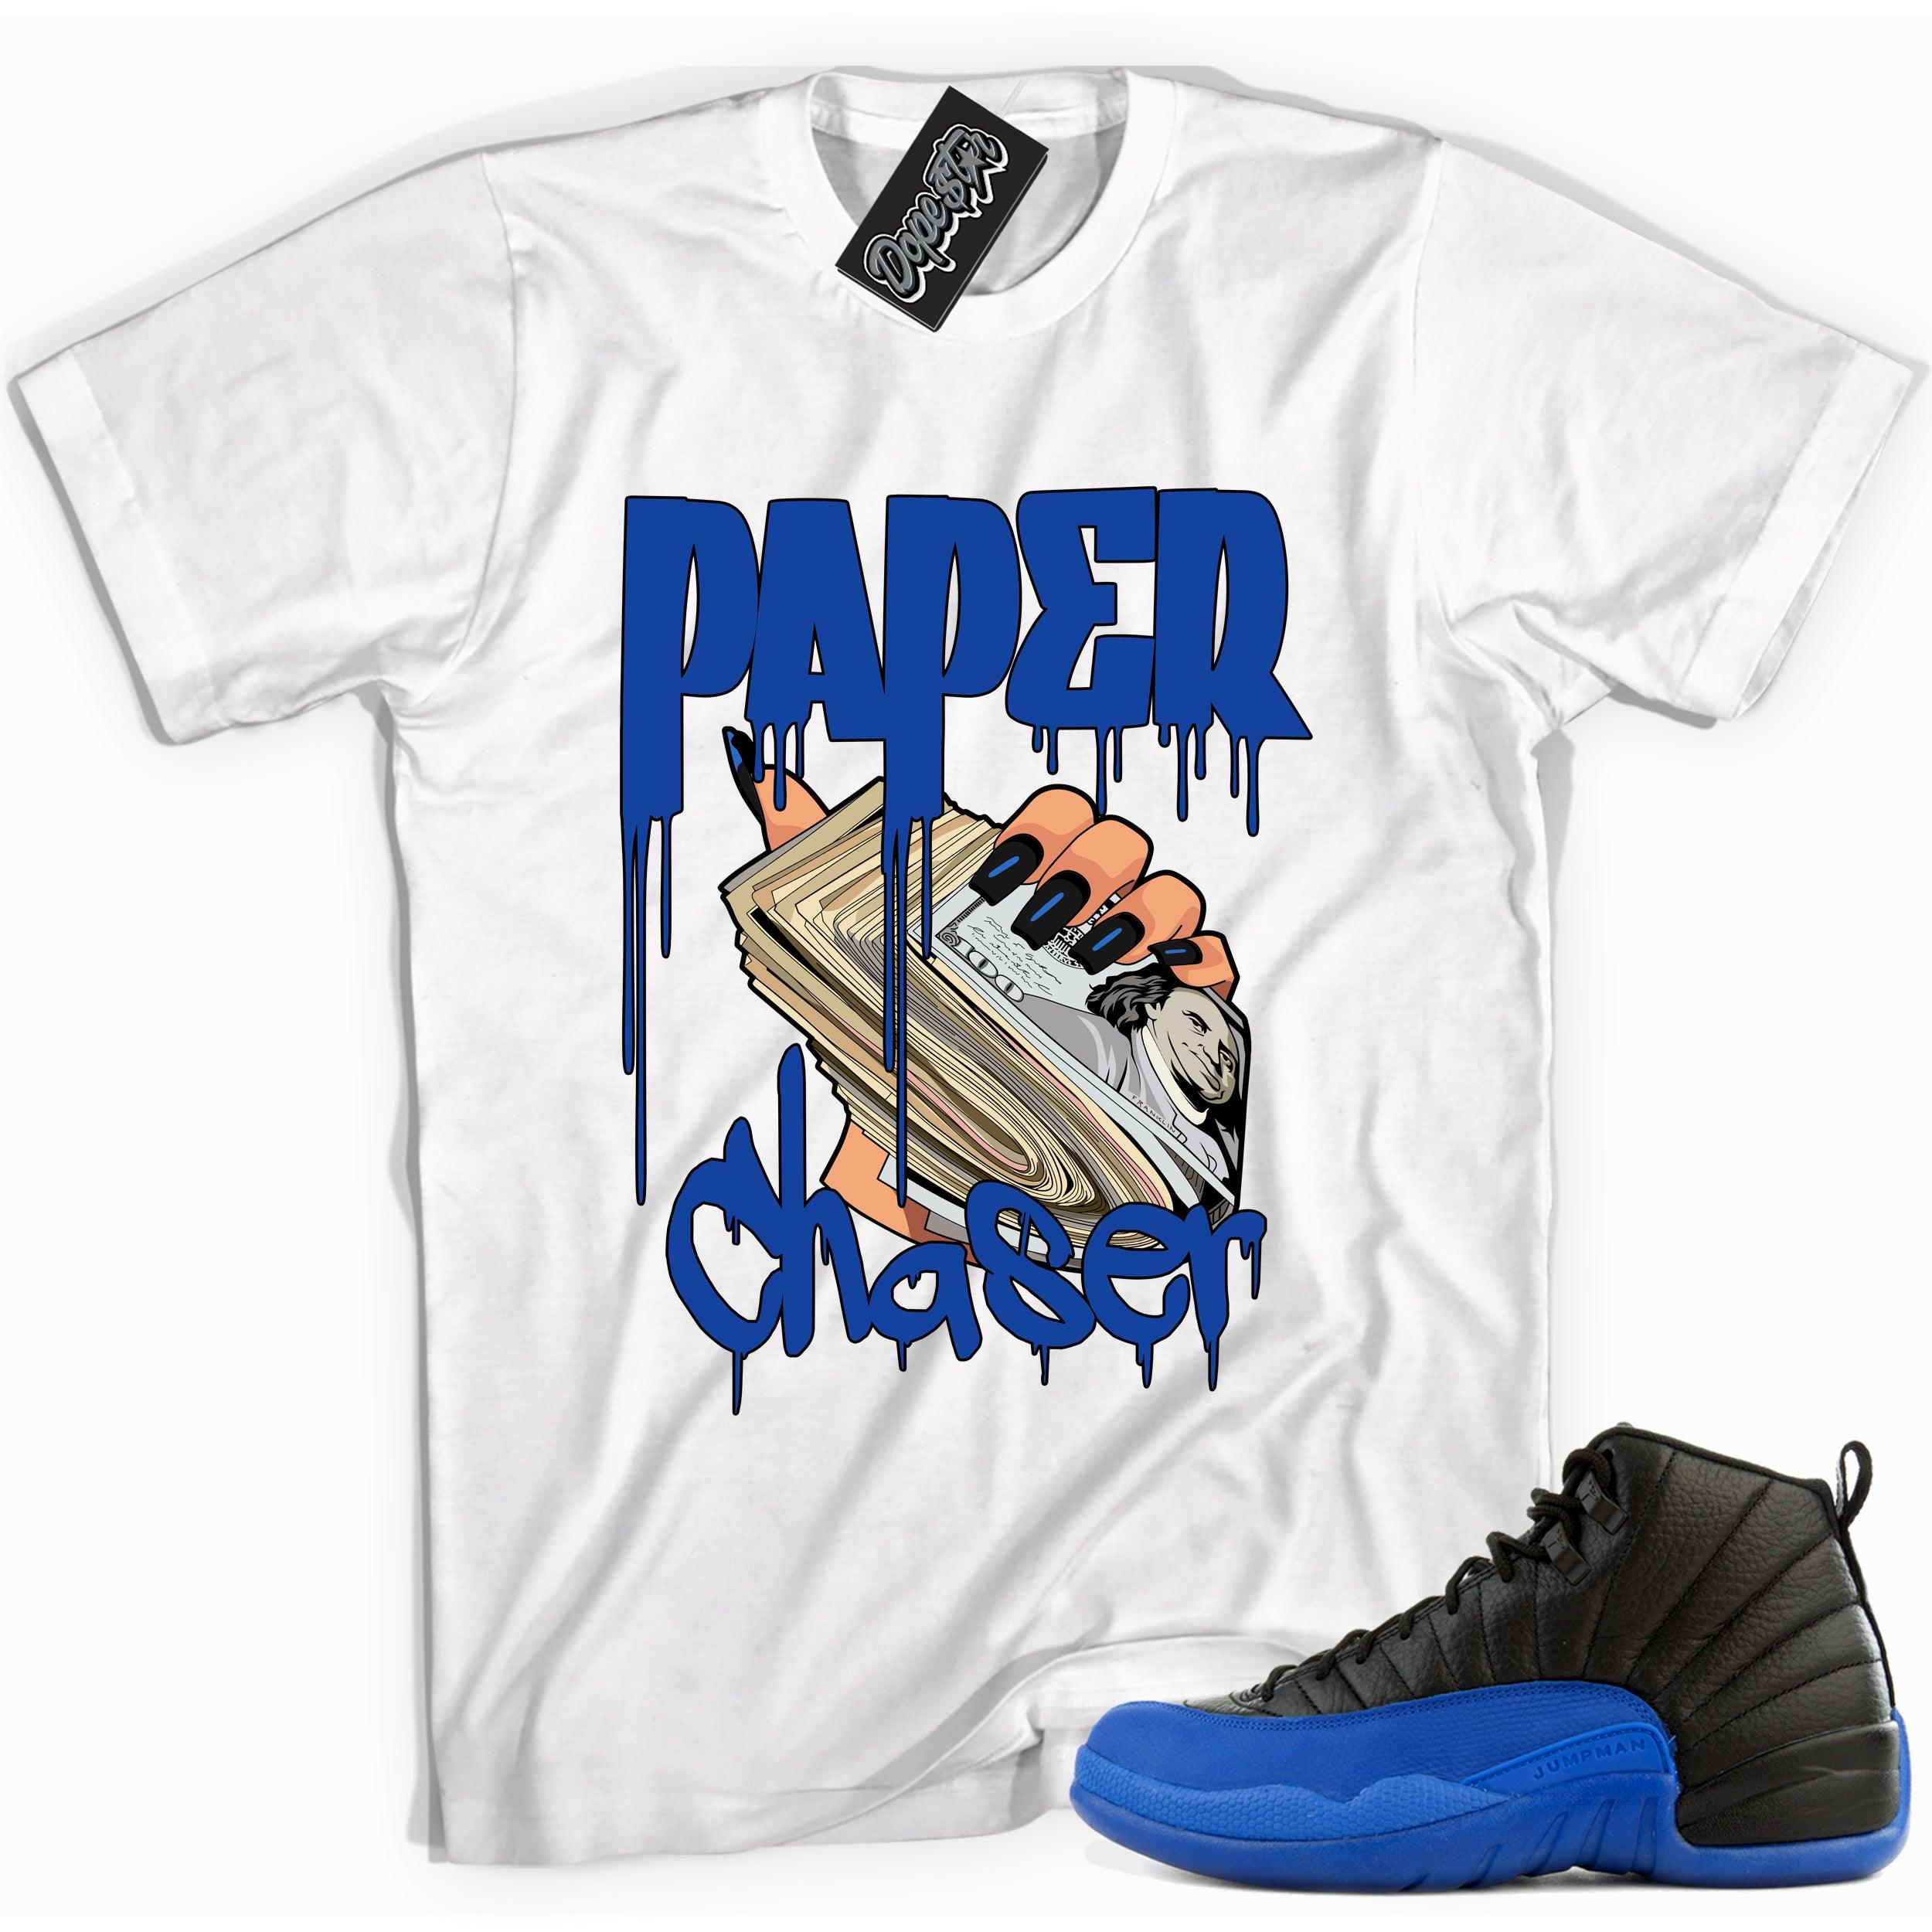 Cool white graphic tee with 'paper chaser' print, that perfectly matches Air Jordan 12 Retro Black Game Royal sneakers.